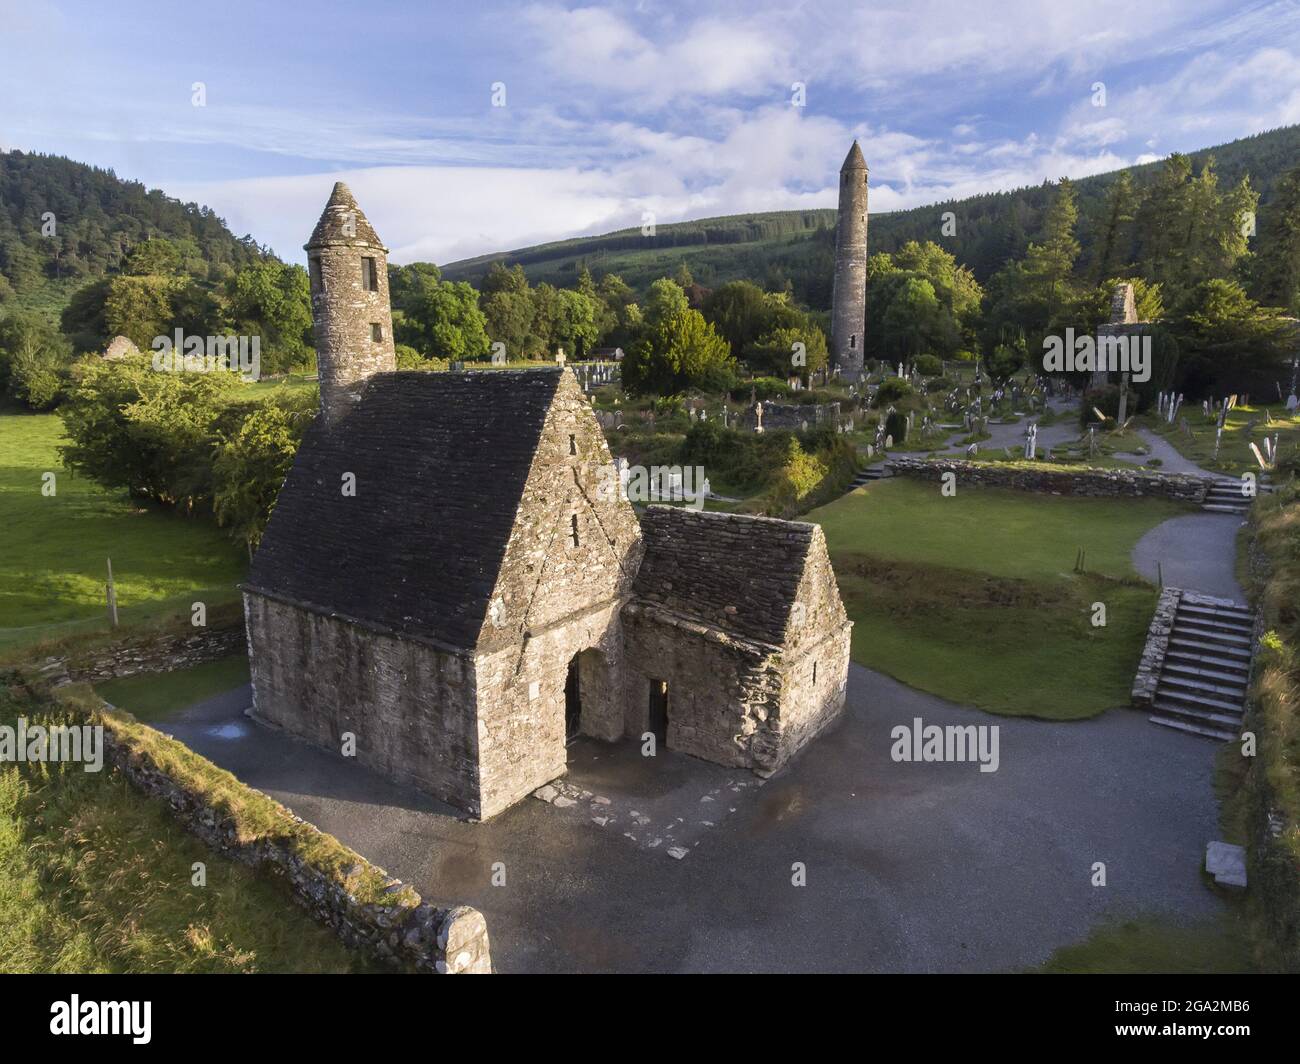 St Kevin's Church at Glendalough (or The valley of the Two Lakes) is the site of an early Christian monastic settlement nestled in the Wicklow Moun... Stock Photo